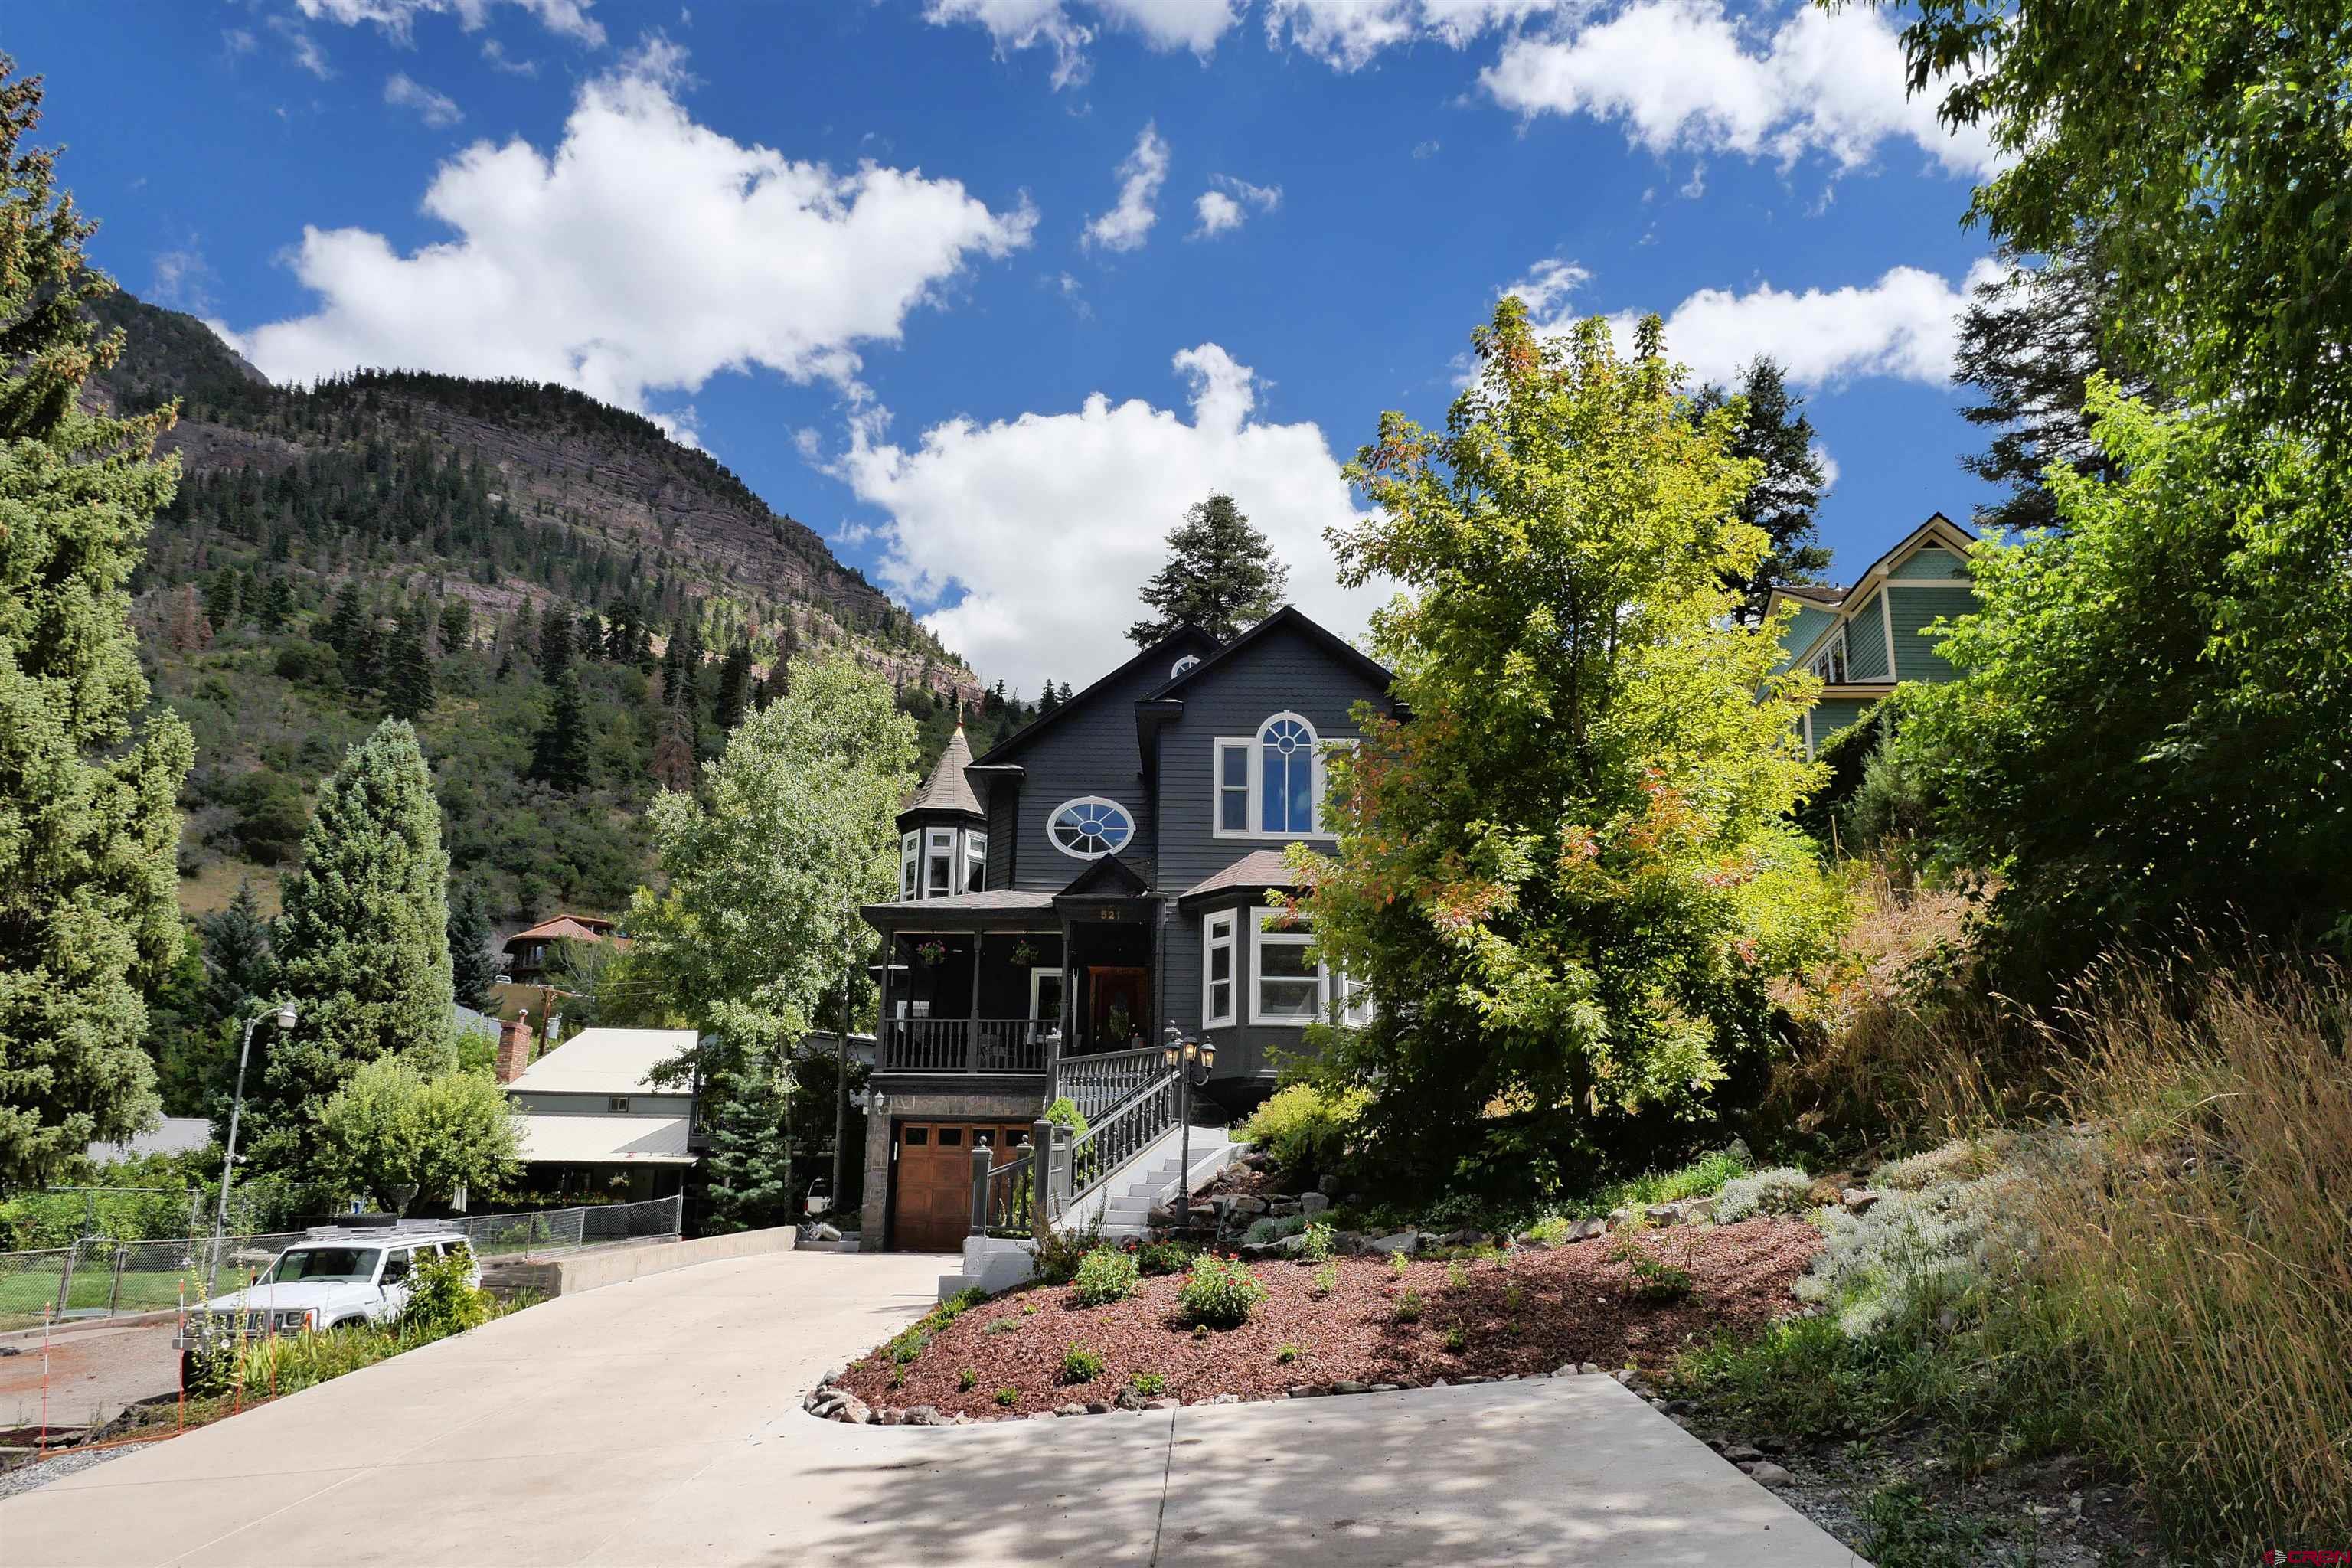 Discover this meticulously crafted home in the Heart of Ouray, strategically positioned to embrace the charm of the Gem of the Rockies. Nestled at the base of the beloved Vinegar Hill, Ouray's iconic sledding spot, this residence offers sweeping vistas of the valley, including the Rock of Ages and Twin Peaks.  Living here provides direct access to popular hiking destinations like Chief Ouray Mine, Cascade Falls, Box Canyon, Perimeter Trail, and the Ice Park. Ouray School, essential shops, restaurants, and the Hot Springs are all within easy walking distance.  What sets this location apart is its tranquility and privacy. This residential enclave experiences minimal traffic and prohibits short-term rentals, ensuring a serene atmosphere without the hustle and bustle found in other parts of town.  The house itself is a masterpiece with exquisite interior and exterior finishes. Spacious rooms, elegant trim work, regal lighting fixtures, and oversized windows create warm and inviting spaces for gatherings with loved ones.  Approaching the main entrance, you'll ascend a grand stairway from the generous west-side parking area, passing manicured gardens and a charming brick sitting area. The soothing sound of flowing hot spring water, a testament to Ouray's allure, can be enjoyed year-round from the west-facing wrap-around front porch.  Inside, the front entrance welcomes you with an impressive winding stairway leading to the upper level and an open floorplan on the main level. To your right, a beautiful sitting room boasts a built-in fireplace and windows overlooking the Sledding Hill and Town. Moving towards the rear, a spacious dining room awaits your guests.  Adjacent is a sizable media-family room connected to a secluded mountain patio with a built-in barbecue, stone walls, and manicured gardens. The kitchen is a culinary haven, featuring marble counters, top-of-the-line appliances, a walk-in pantry, and ornate custom cabinetry.  The stairway to the upper level is a work of art itself, leading to a versatile space at the front of the home ideal for an office, library, or workout room. As you progress towards the back, you'll discover the impressive guest bathroom and two spacious bedrooms along the southern side.  At the rear of the home, a splendid primary suite boasts east-facing windows and a spacious, luxurious bath. The rounded cupola area within the bathroom provides a breathtaking view of the mountains.  The property offers a two-car oversized garage accessed from the alley on the east side and a small garage underneath the front area that can serve as a gear storage space for ATVs, golf carts, or a Jeep. It also houses the ultra-efficient natural gas in-floor heating system.  This meticulously maintained home in Southwest Colorado is suitable for year-round living, a seasonal escape, or weekend retreat. The sellers are generously offering it fully furnished, with just a few exceptions, simplifying your transition.  If you've ever dreamt of calling Ouray your home, don't miss the opportunity to make this regal residence in the Heart of Ouray your new legacy. Schedule a viewing today.